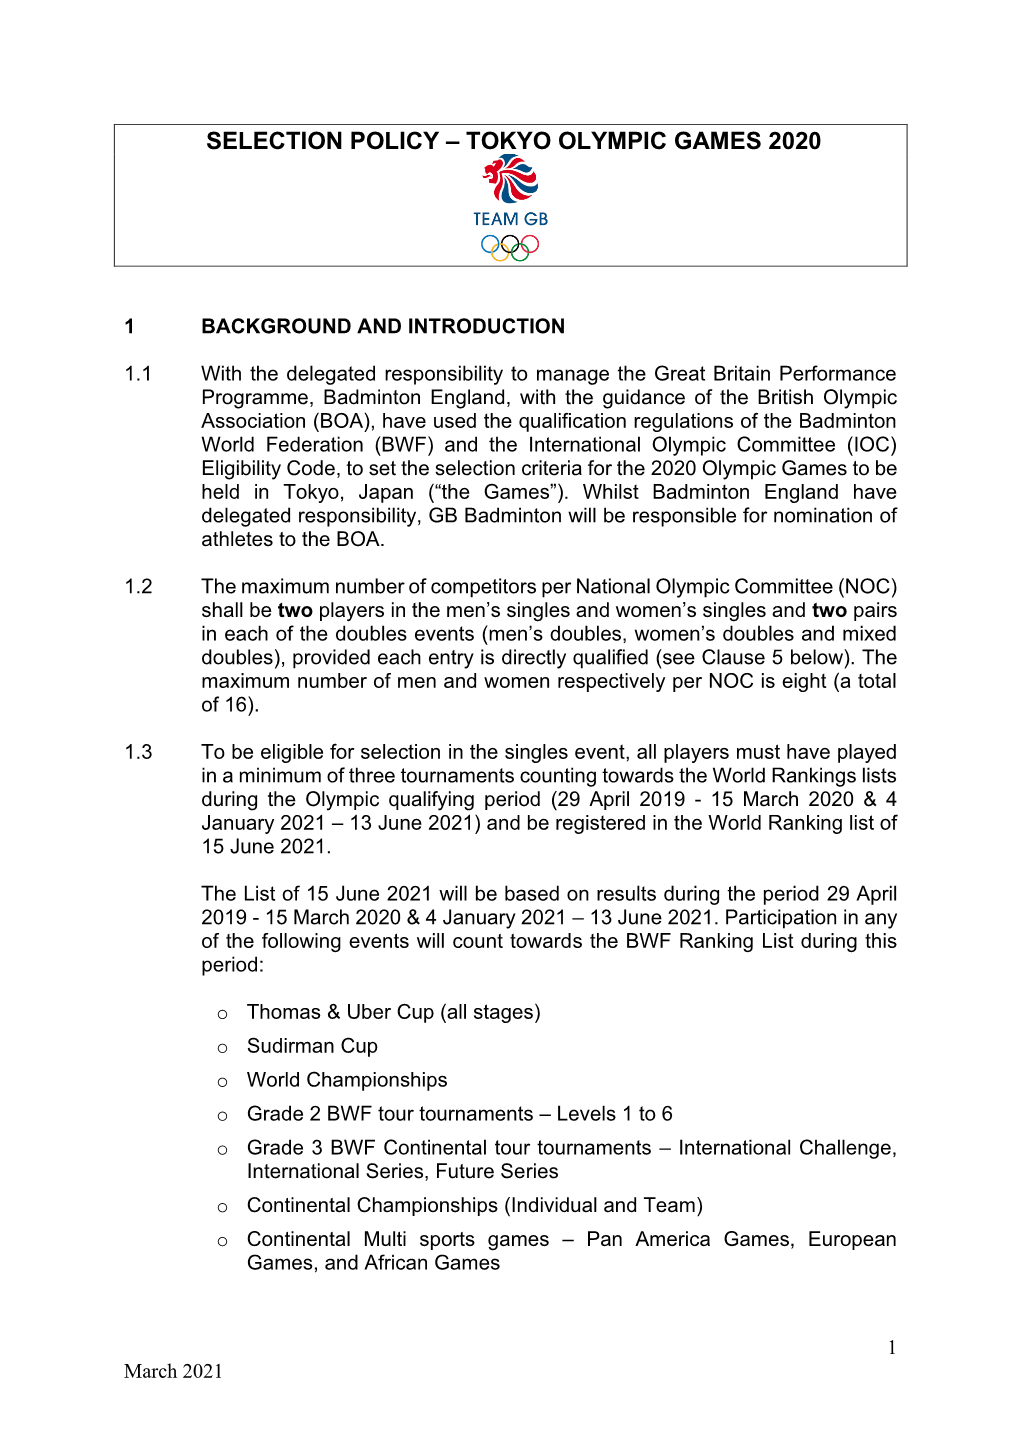 Selection Policy – Tokyo Olympic Games 2020